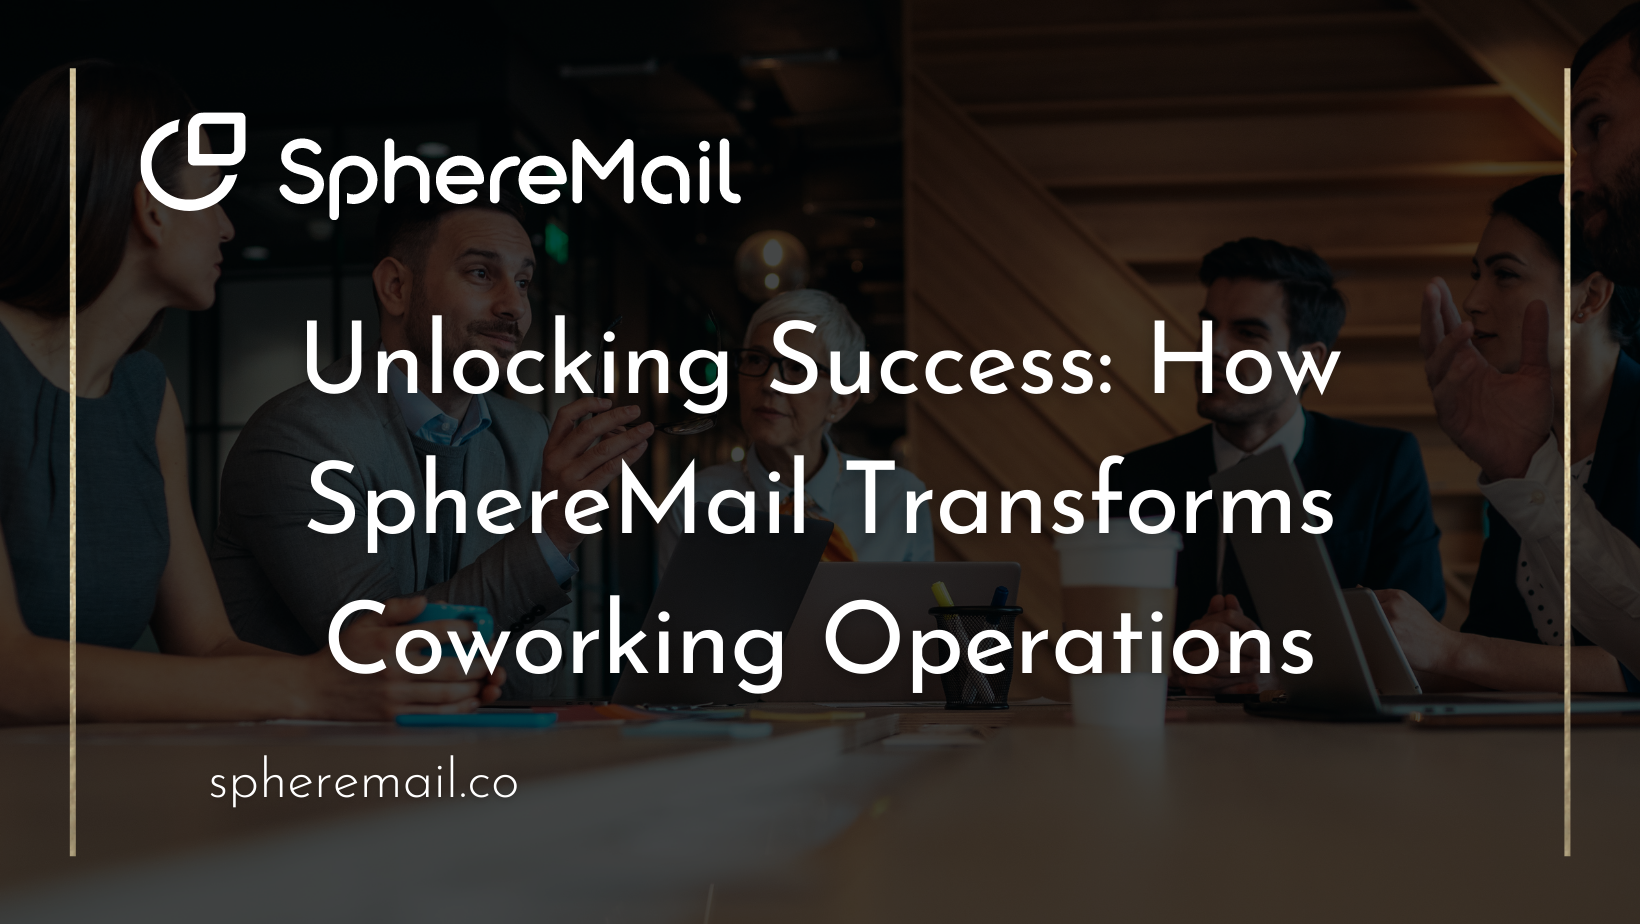 spheremail.co (11)